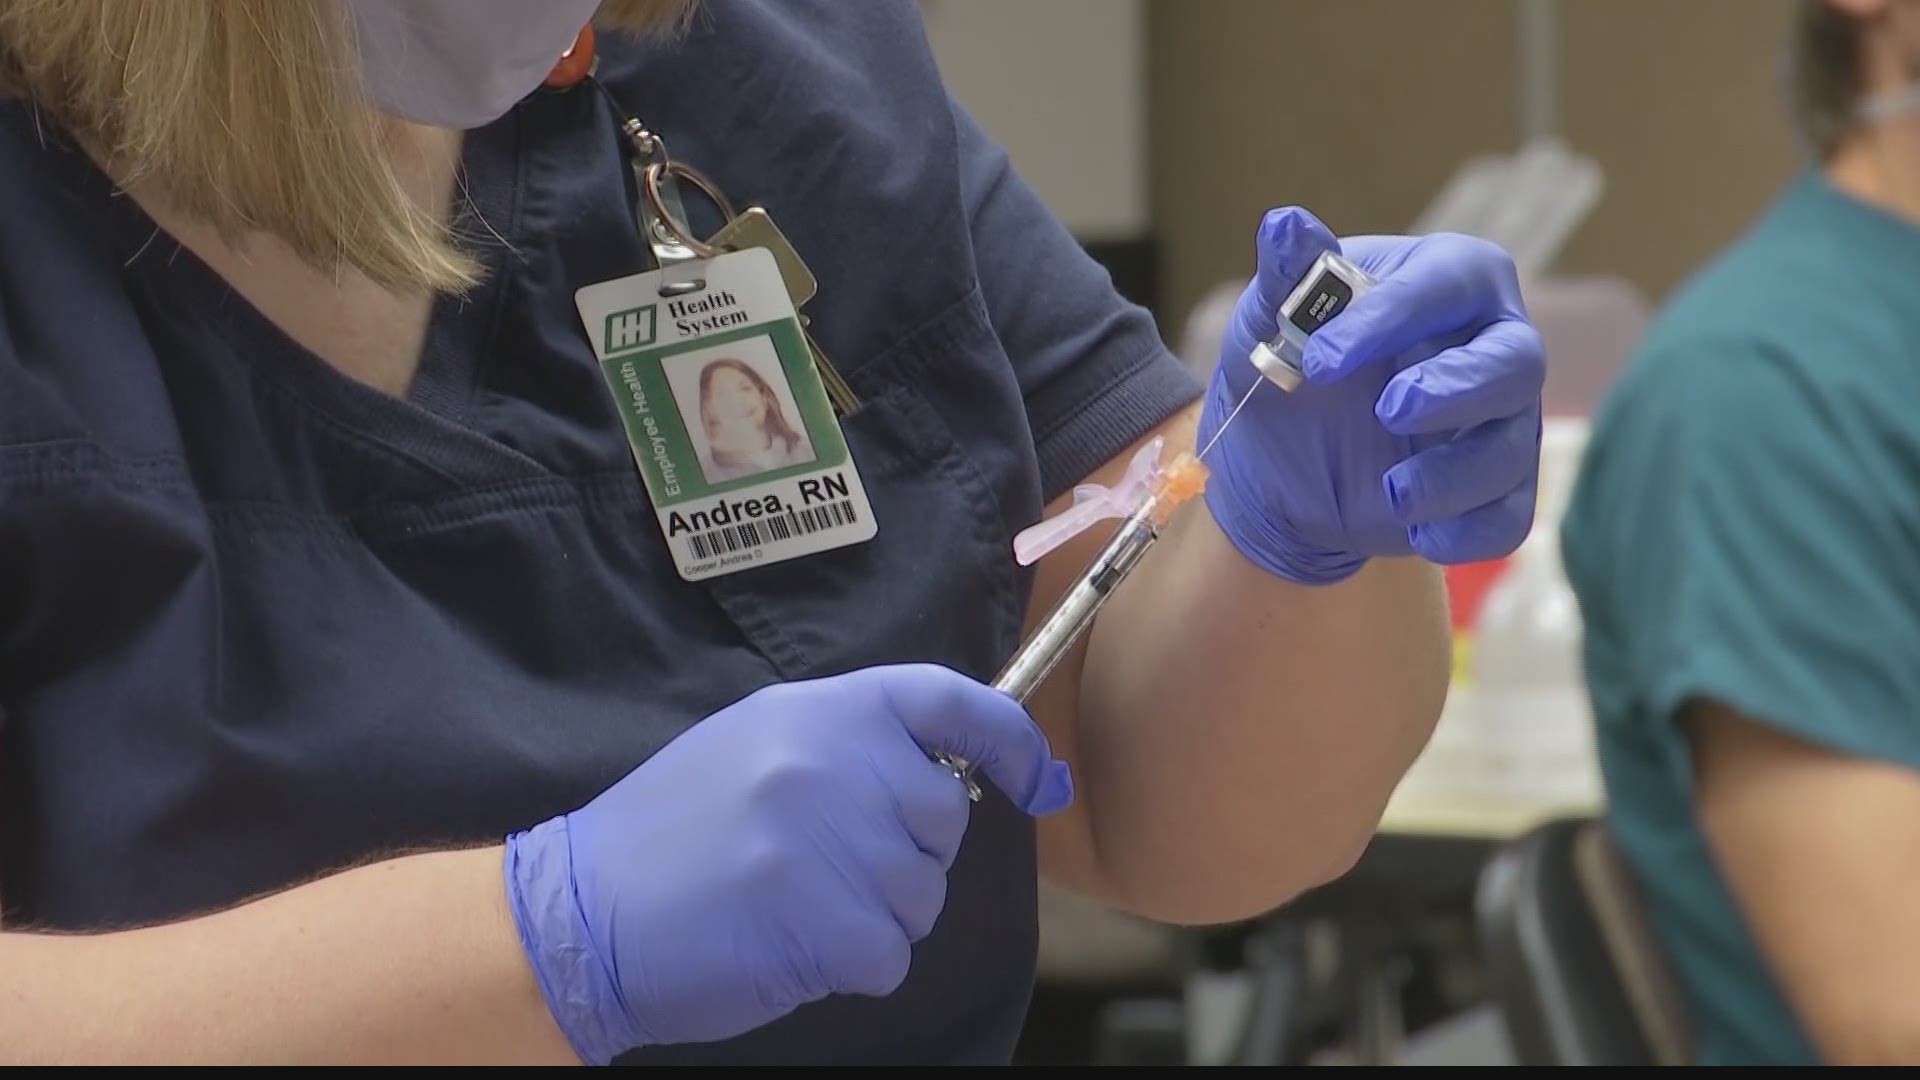 UAB Dr. Erin DeLaney, MD addresses current questions concerning the coronavirus vaccine.